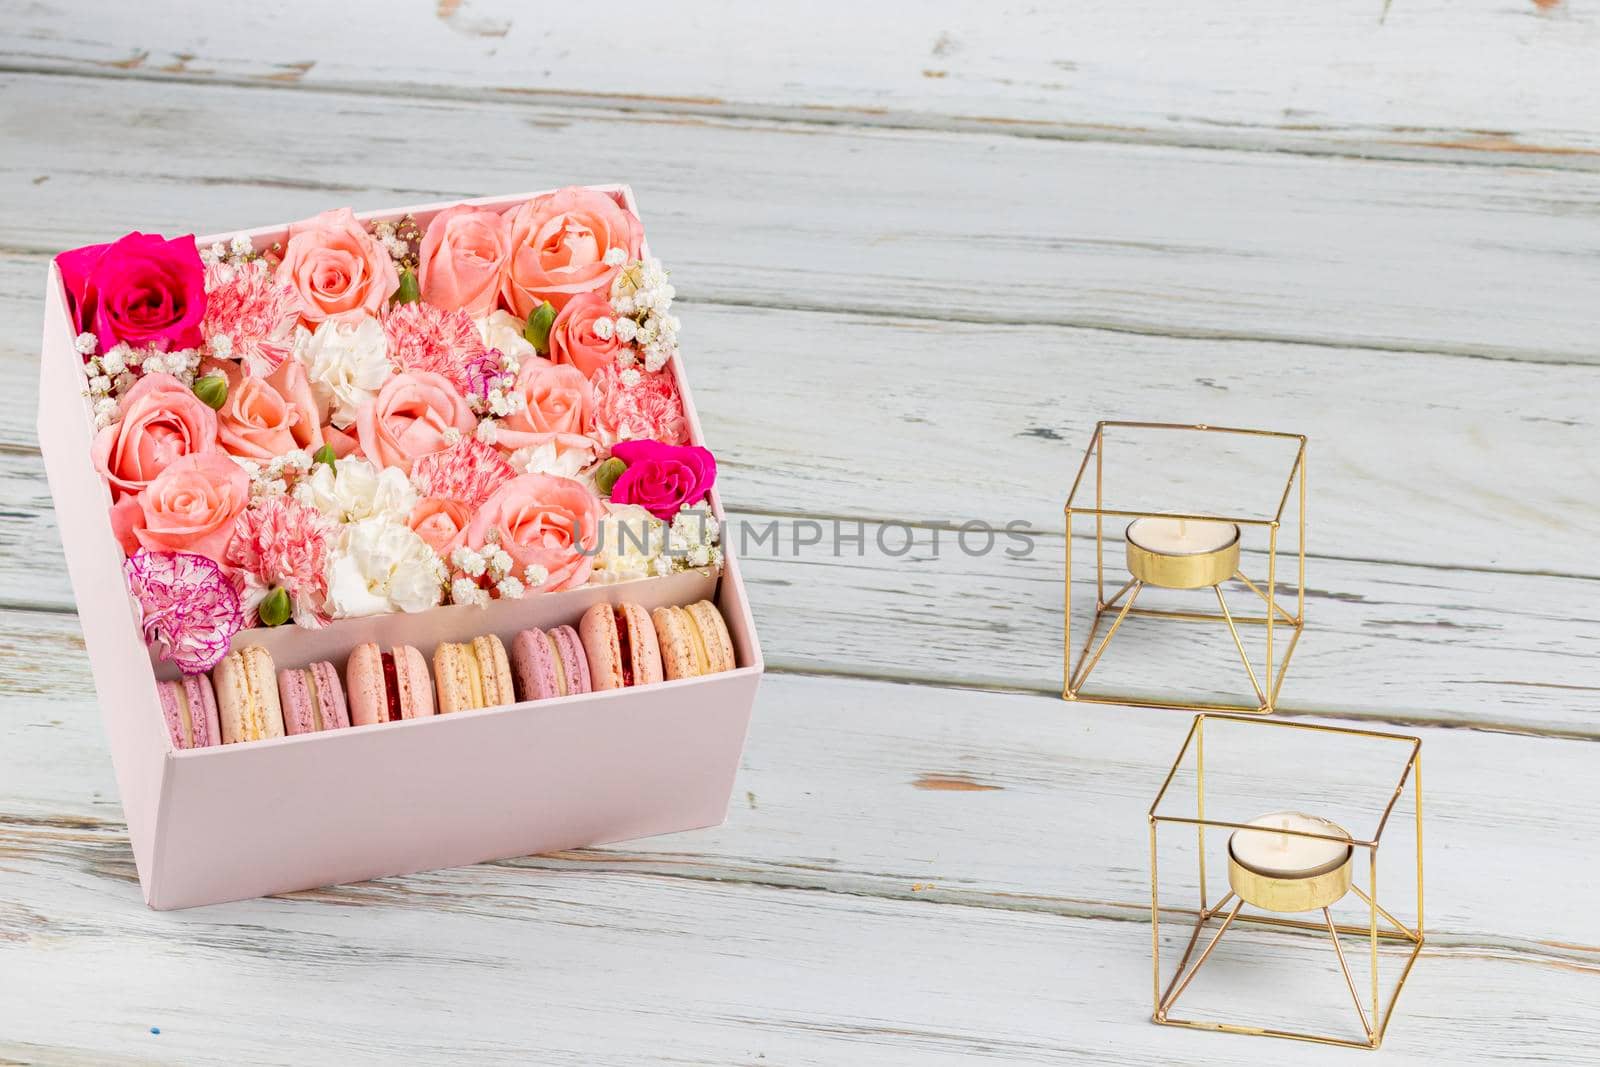 Floral arrangement of pink roses with macarons of different colors by eagg13